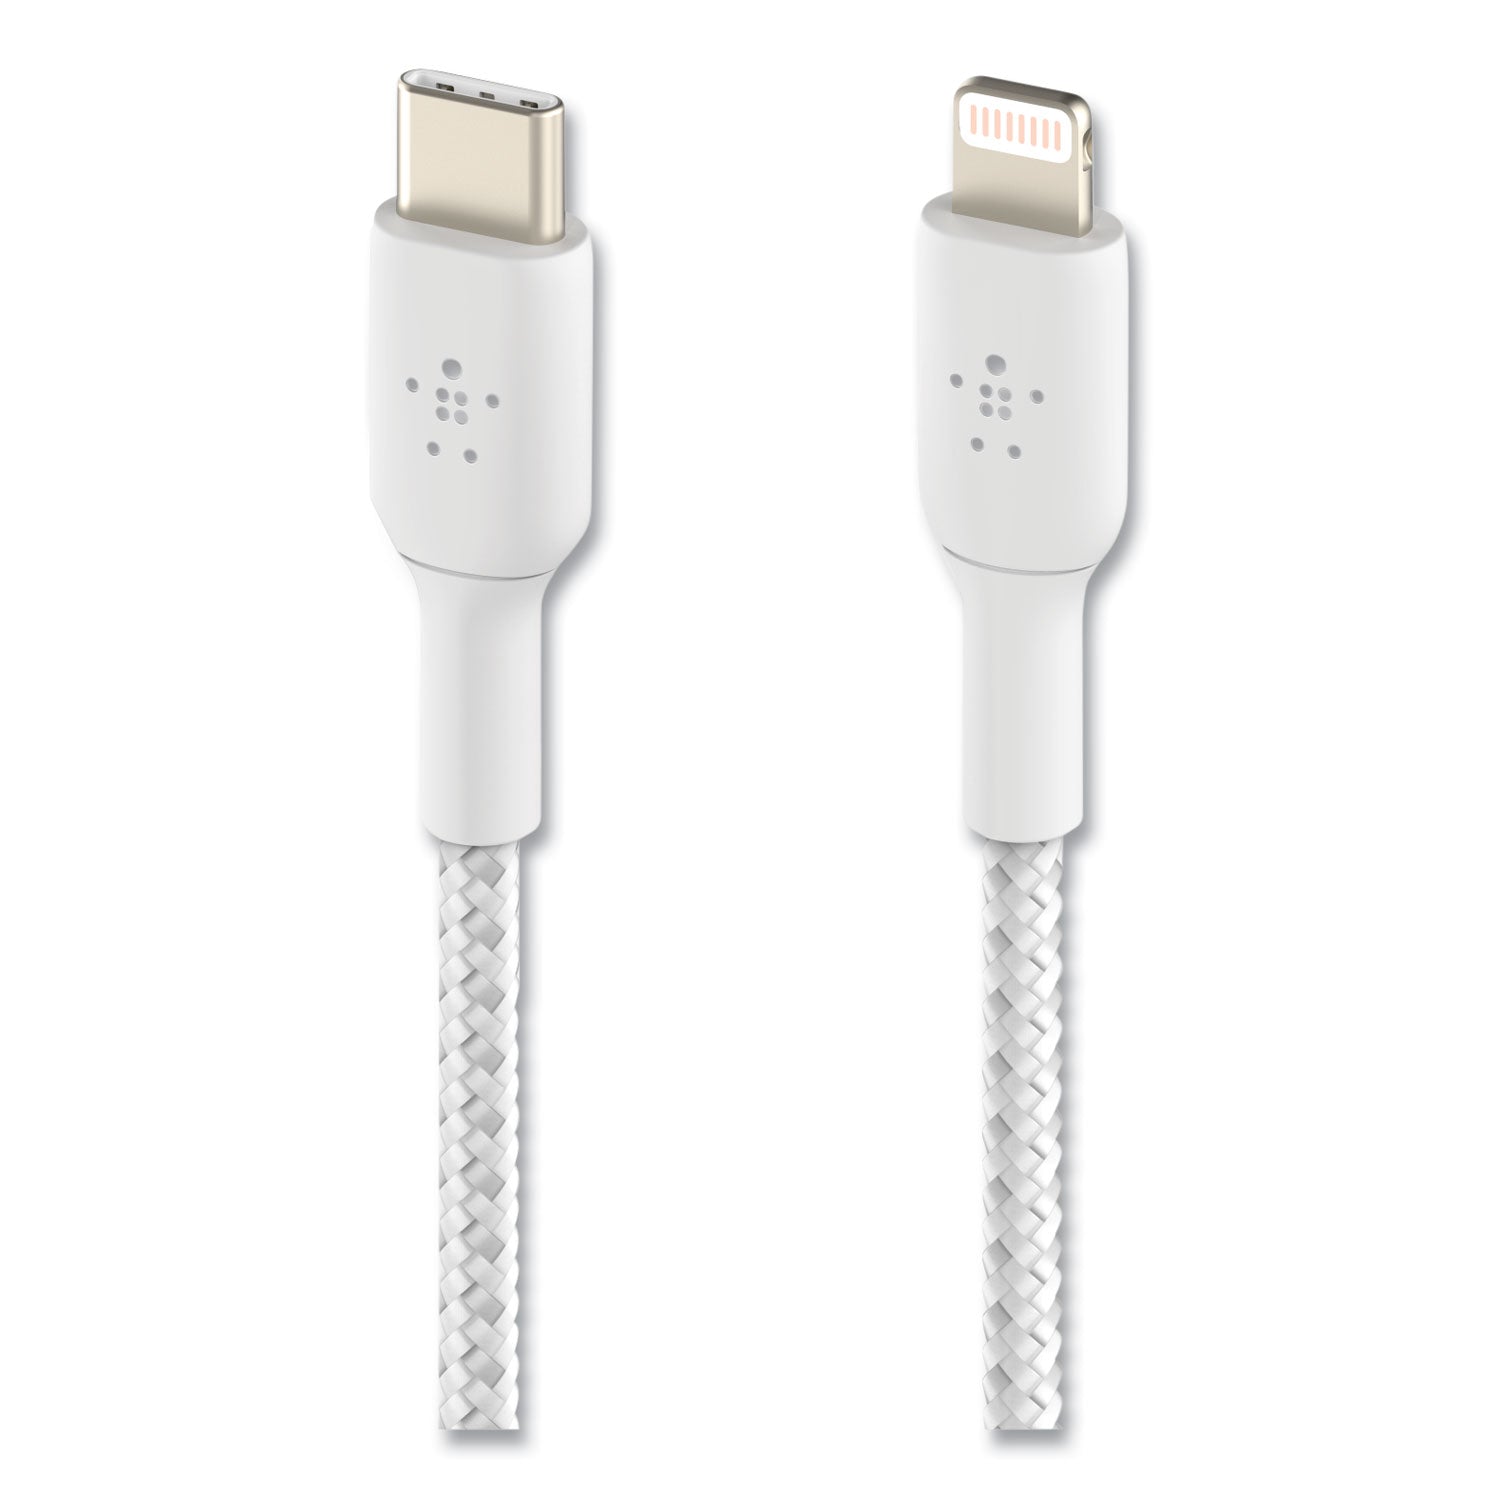 boost-charge-braided-apple-lightning-to-usb-c-chargesync-cable-33-ft-white_blkcaa004bt1mwh - 1